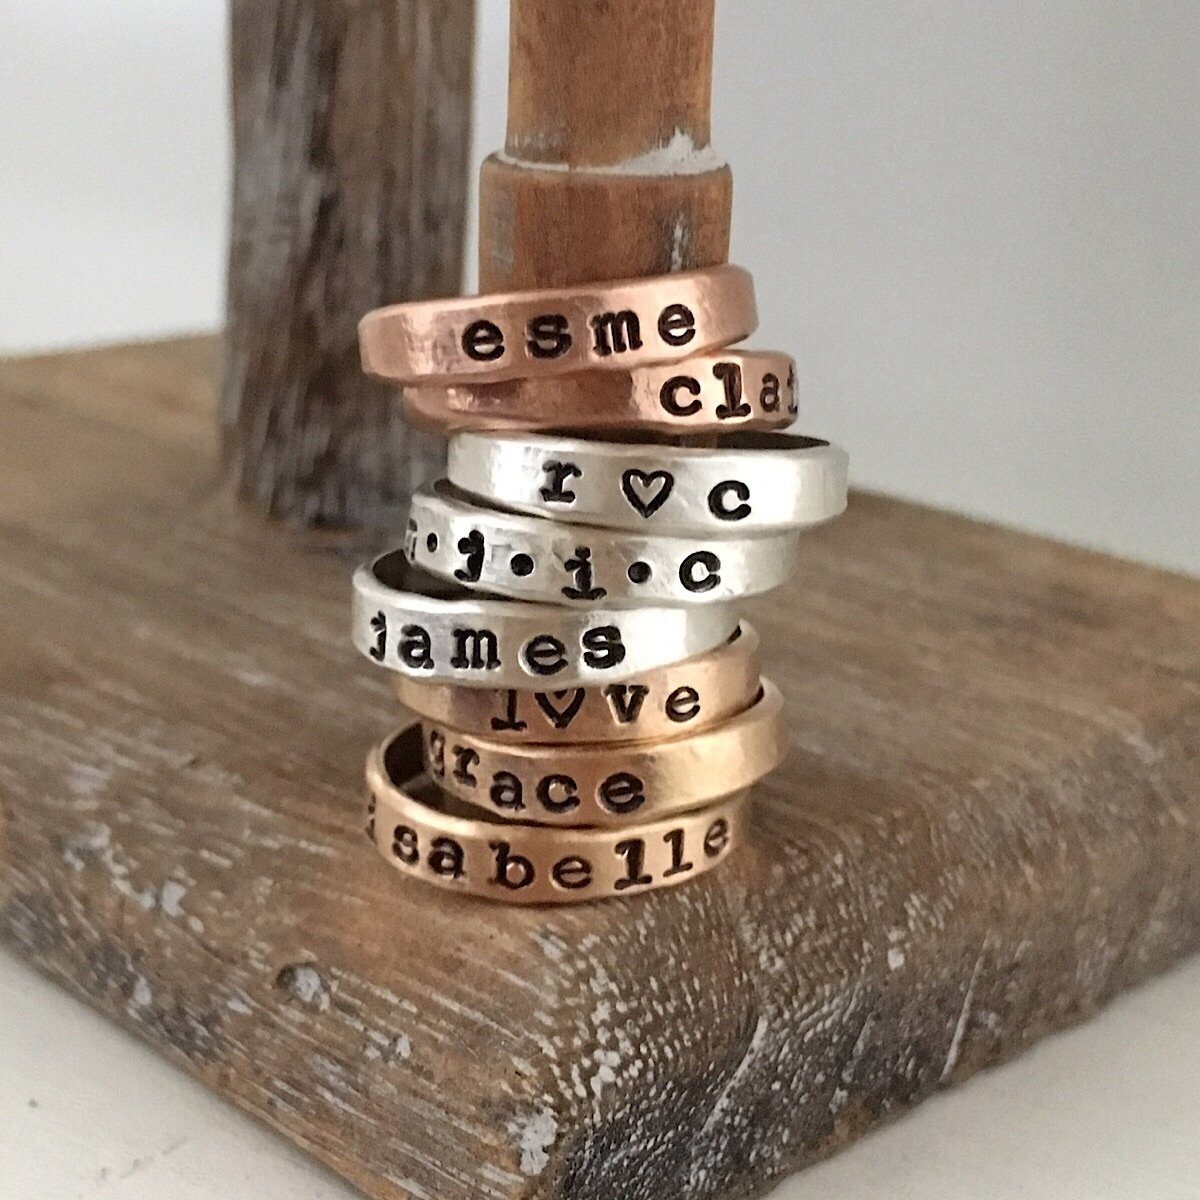 Personalized Stacking Ring Gold  - IsabelleGraceJewelry